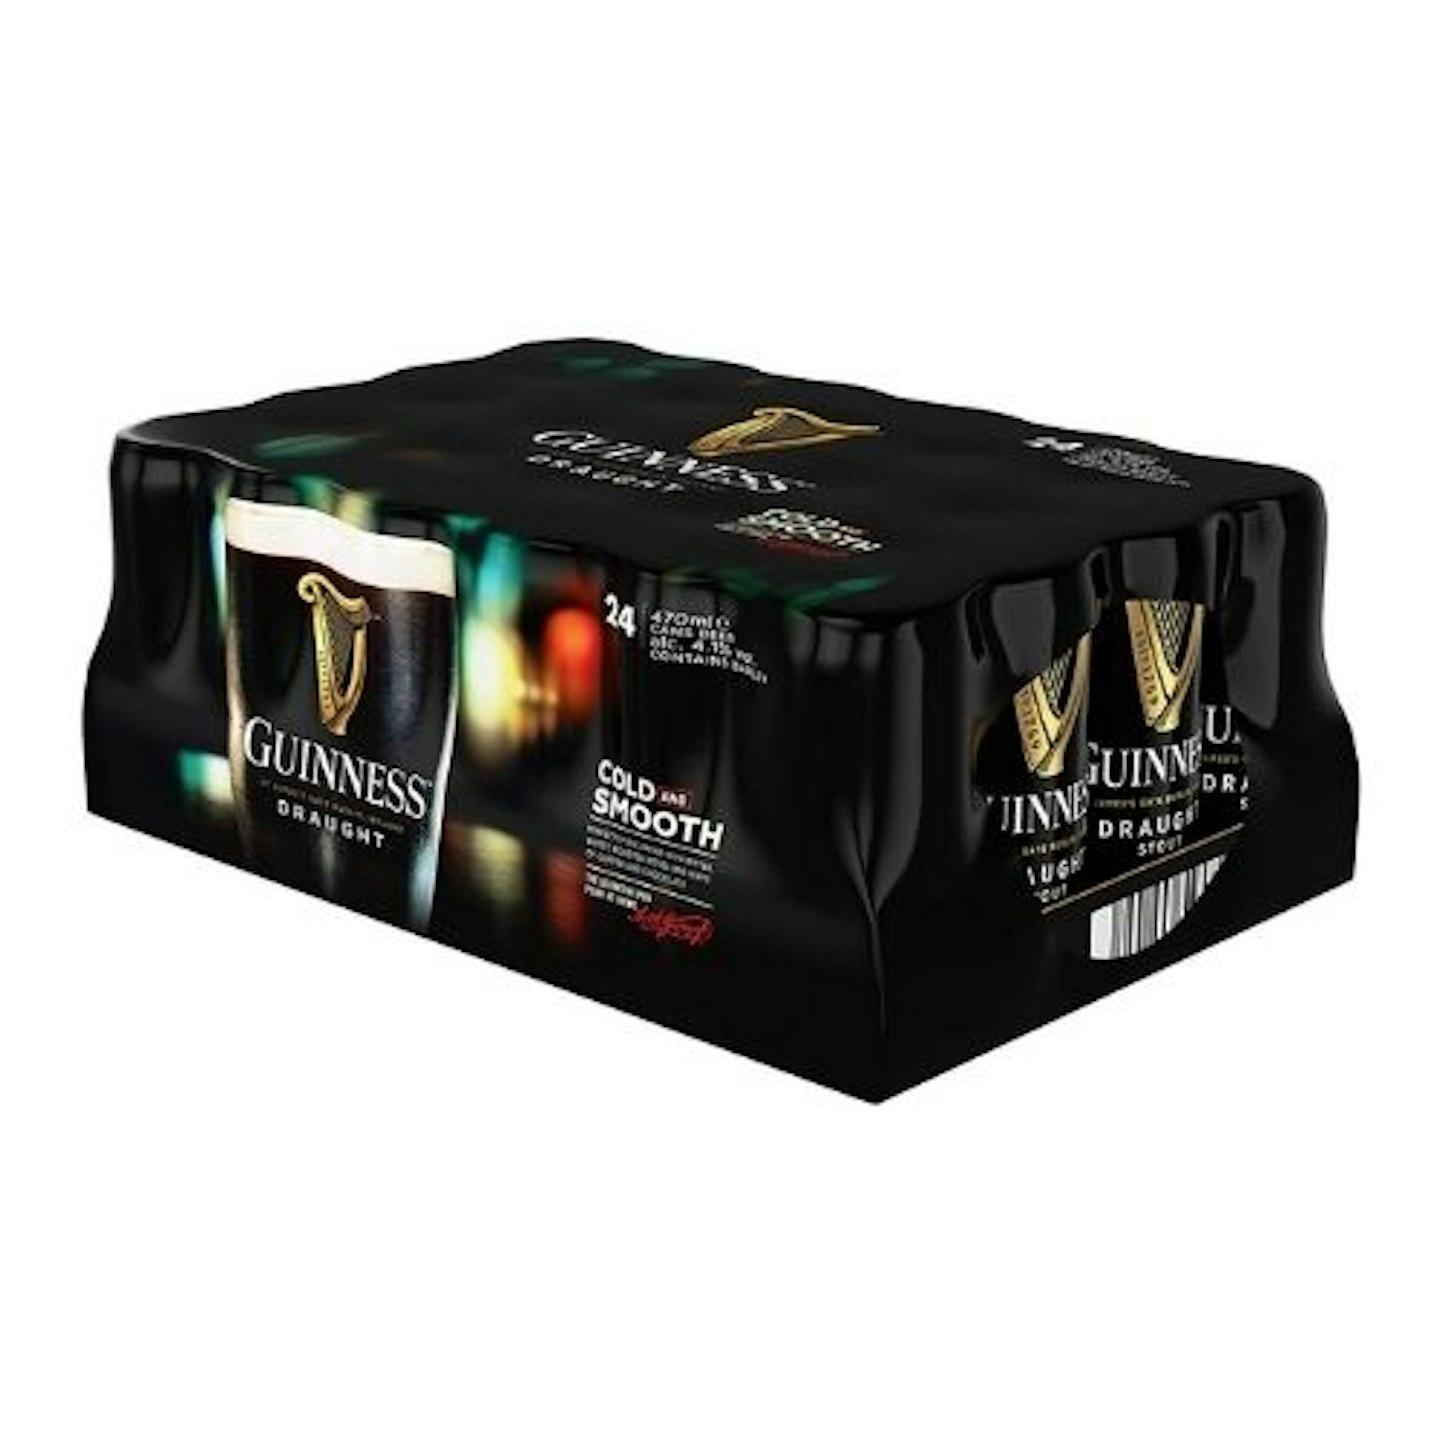 Guinness Draught in a Can 24 x 470 ml